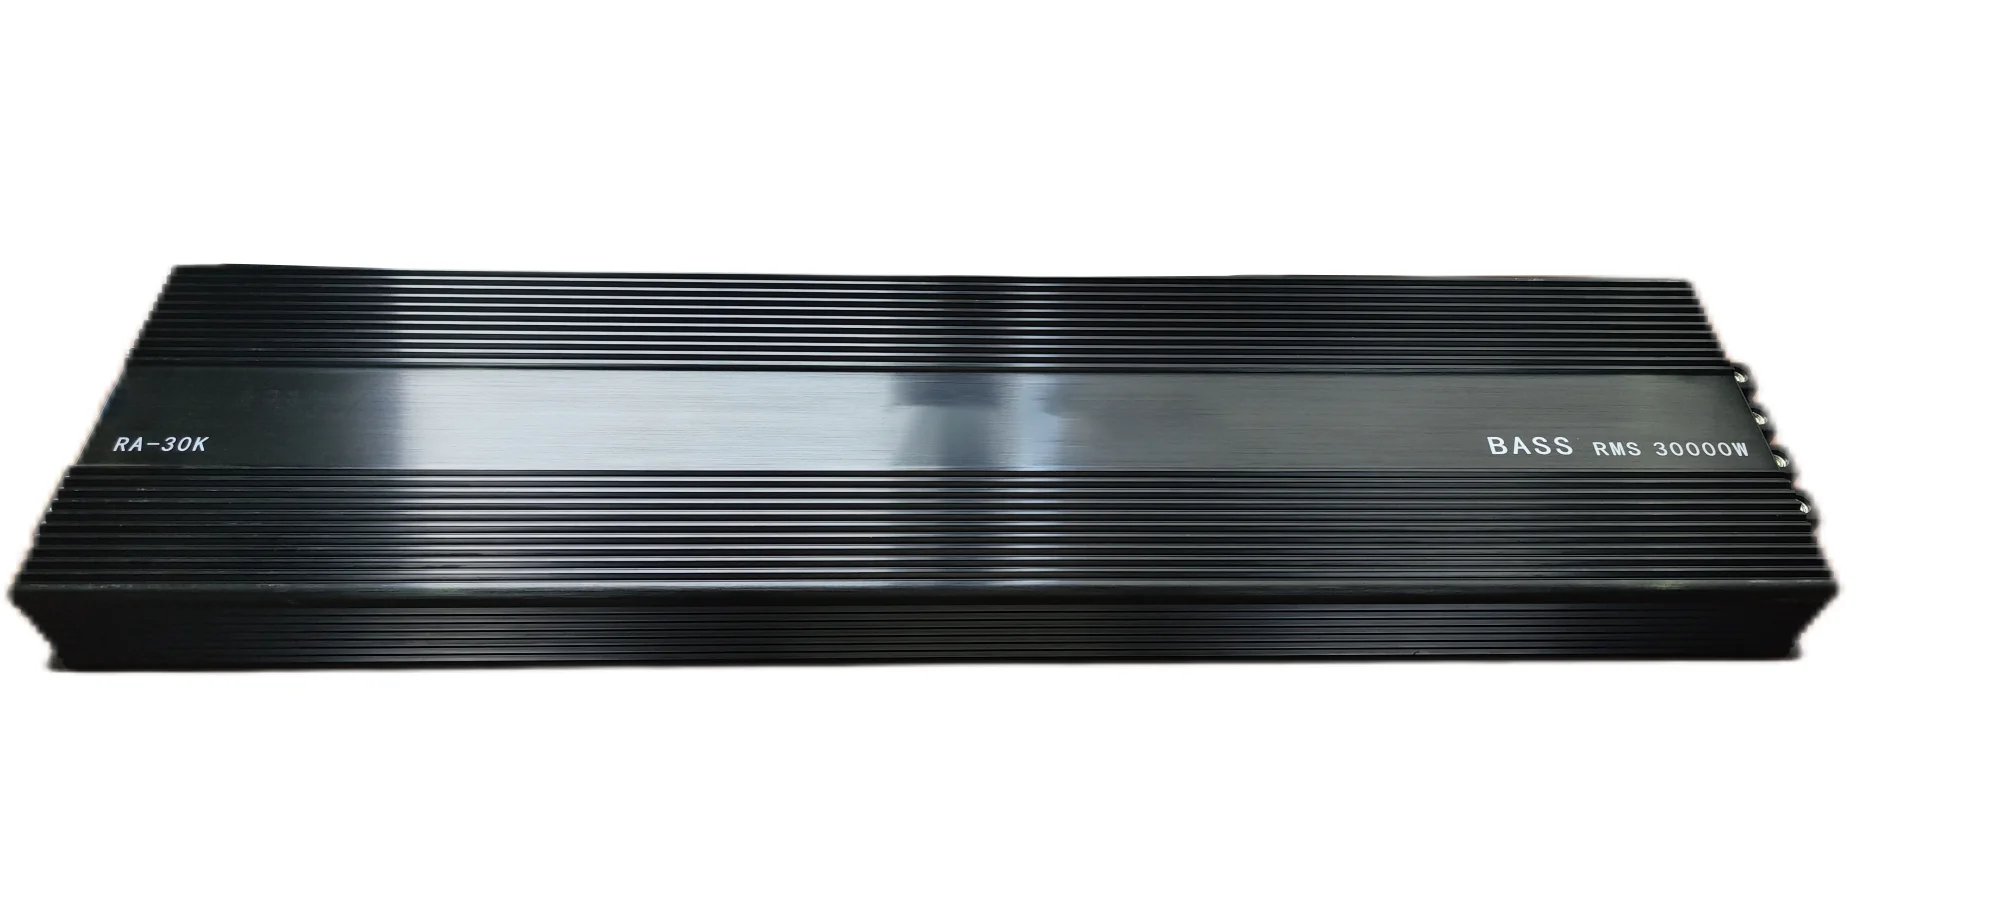 Real RMS 30000W Full Range Class D Amplifier Stable Power  For Competition High Sound Quality Car Audio